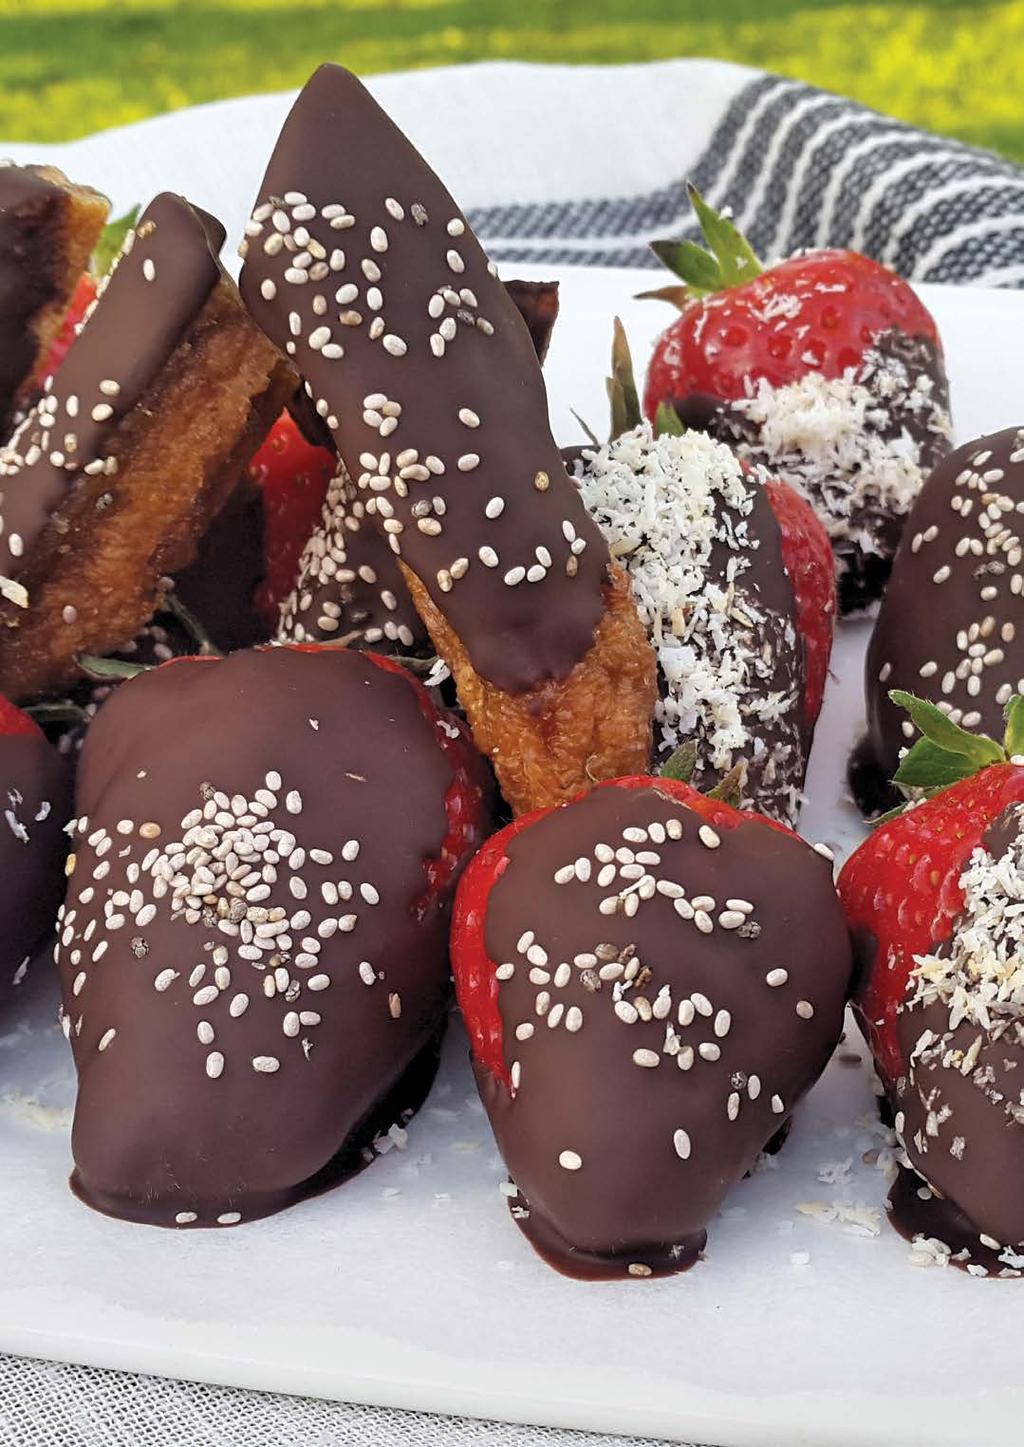 Chocolate DIPPED COCONUT FRUIT SERVES 6 100g Healtheries 99% Sugar Free Dark Chocolate or No Added Sugar Milk Chocolate Baking Bits 12 strawberries 6 large pieces of whole dried banana, chopped into